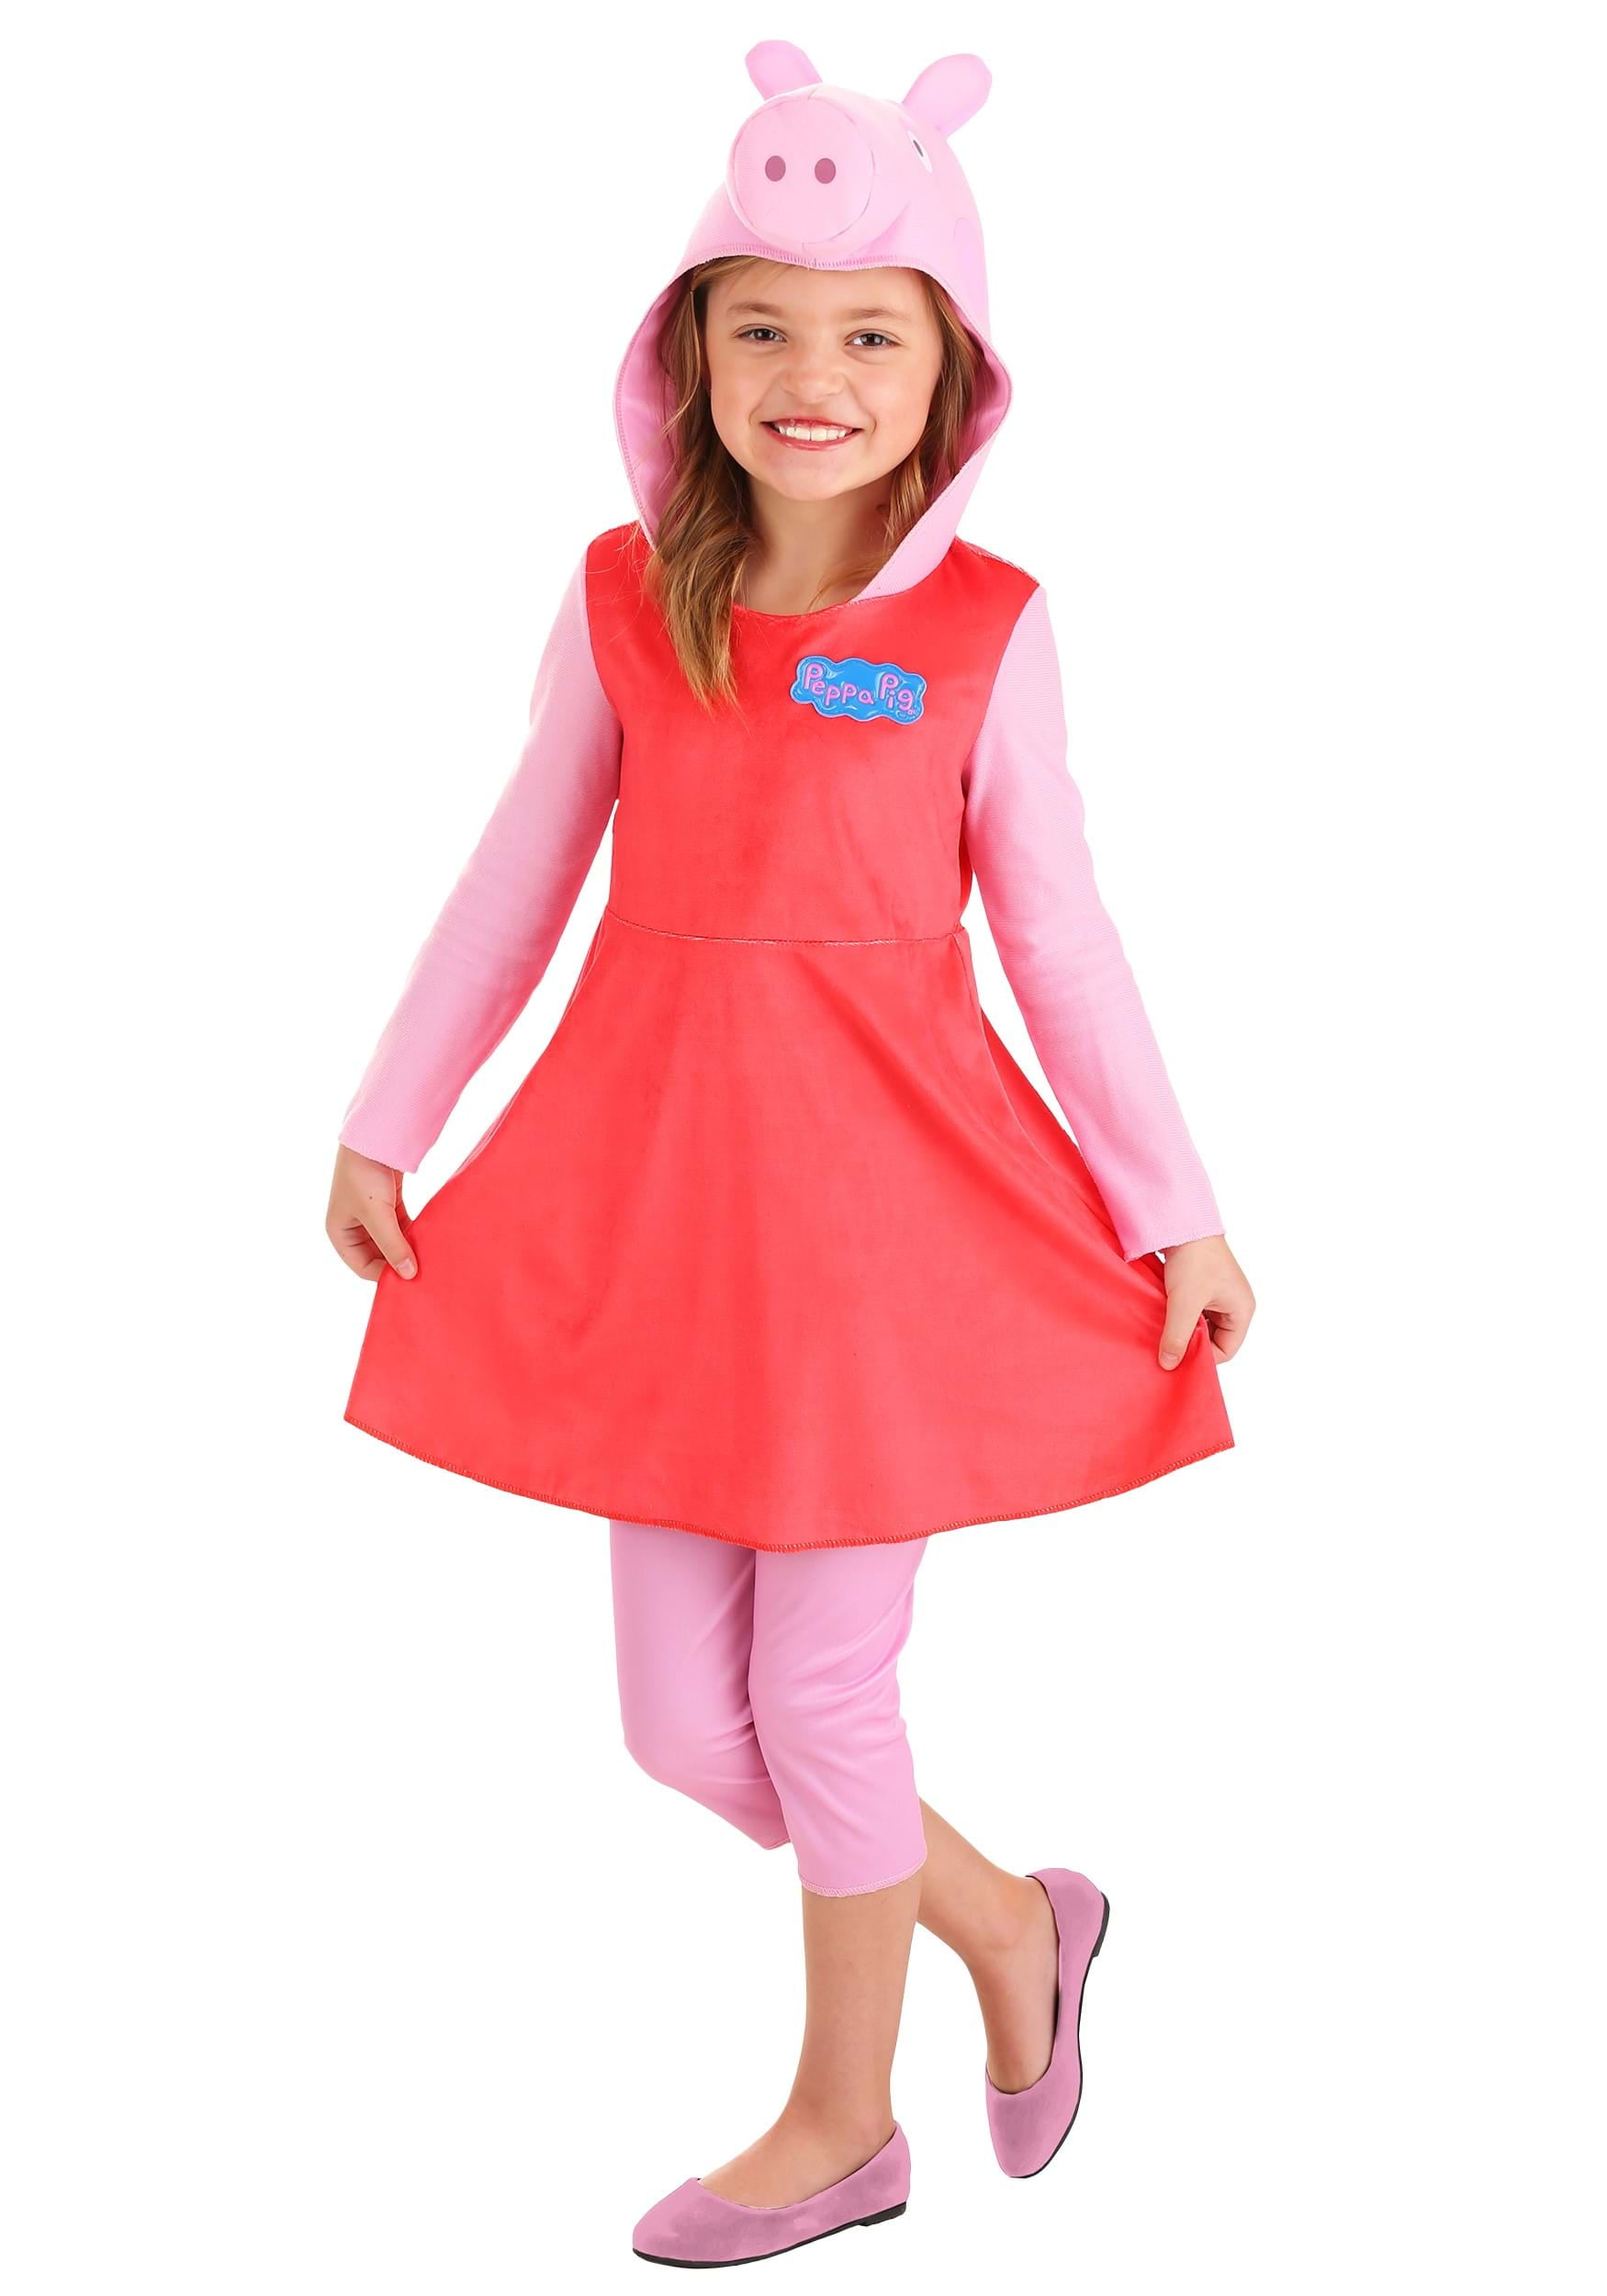 Buy Peppa Pig Outfit For Baby online | Lazada.com.ph